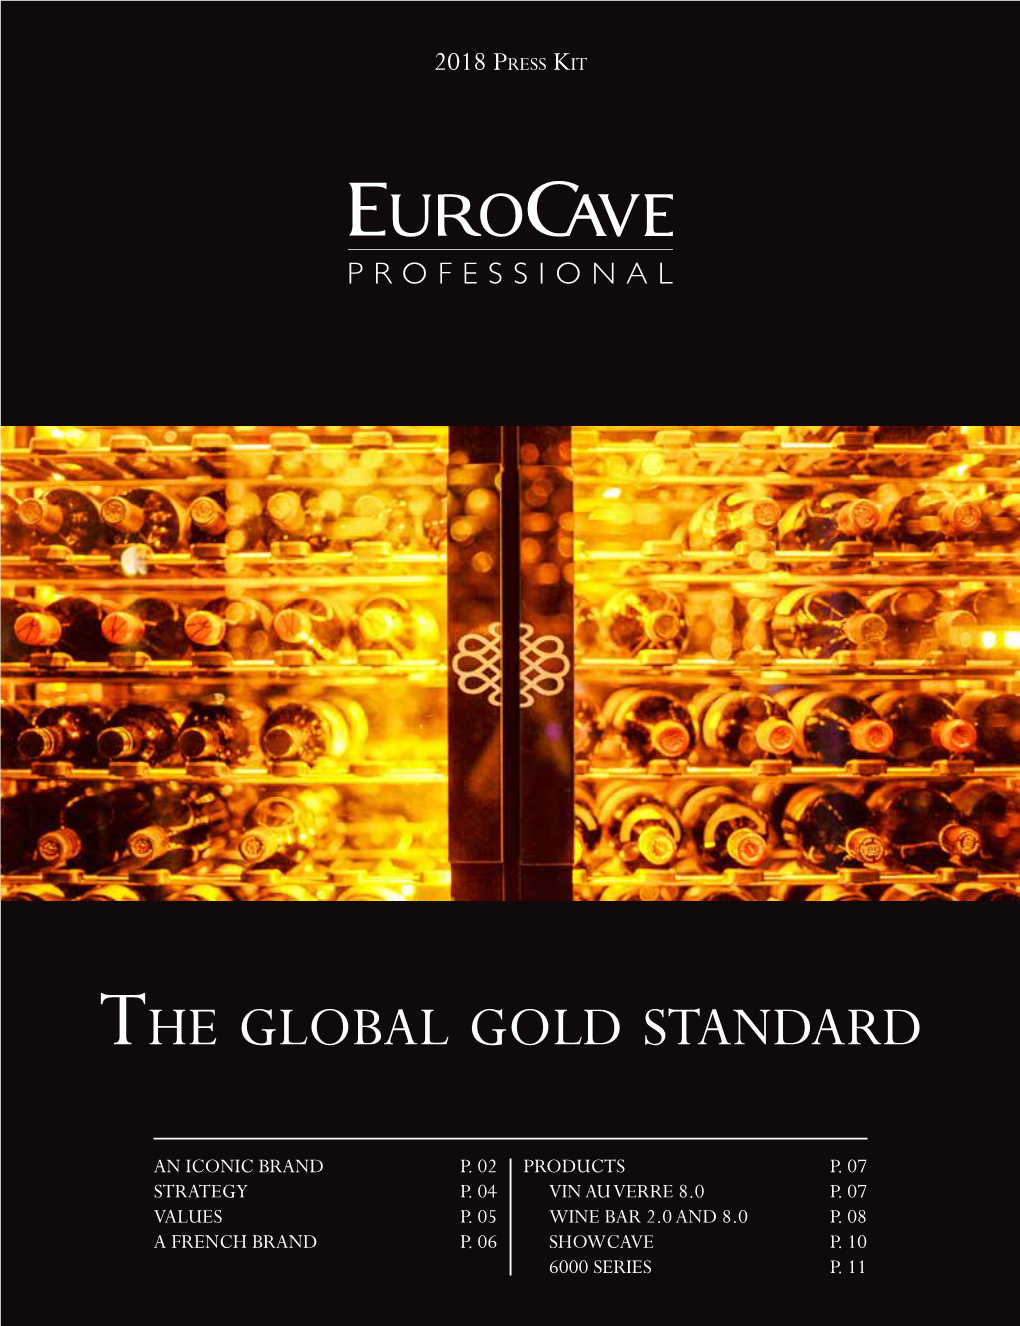 The Global Gold Standard